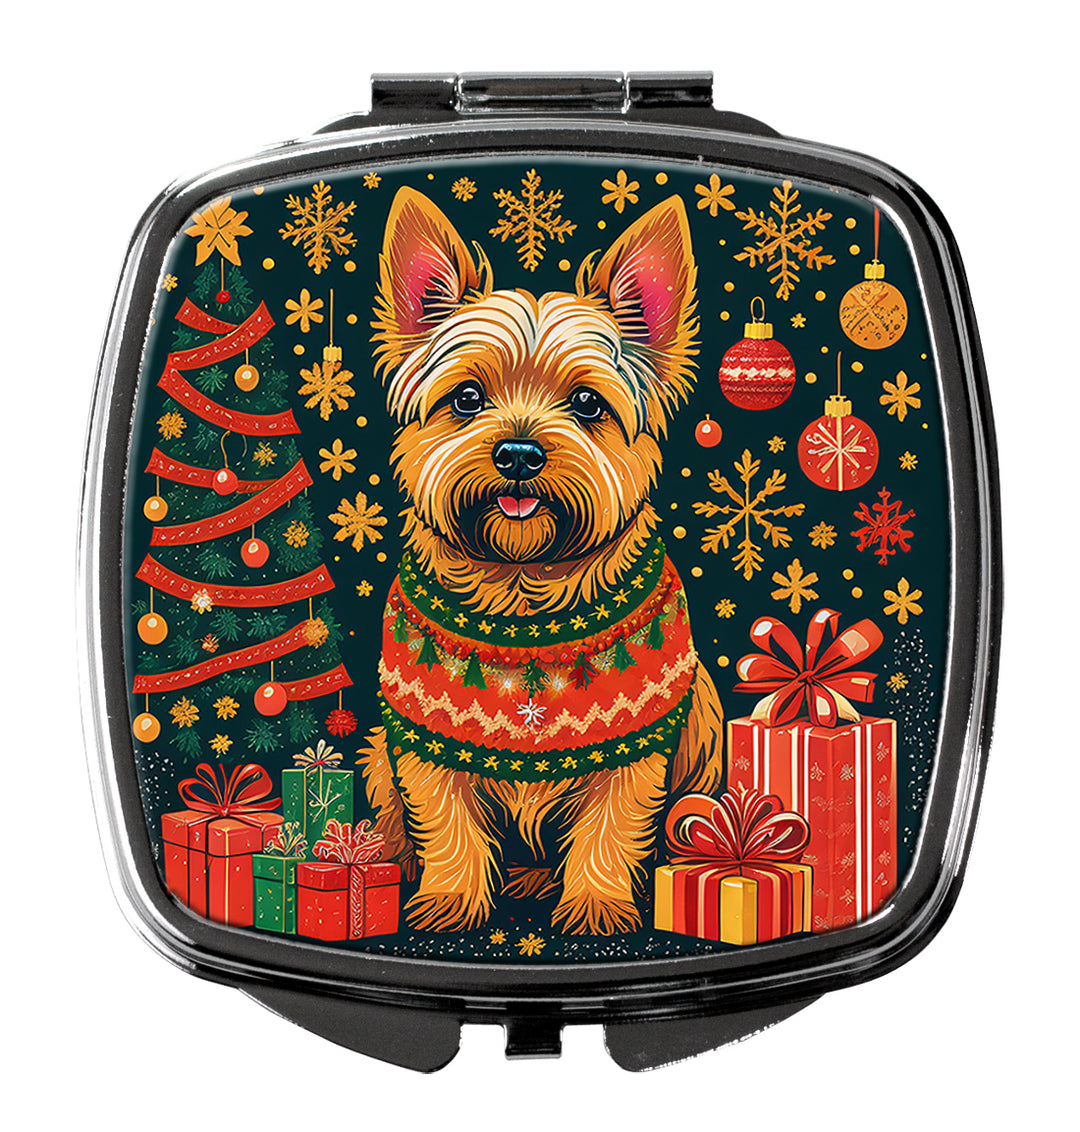 Norwich Terrier Christmas Compact Mirror Image 1